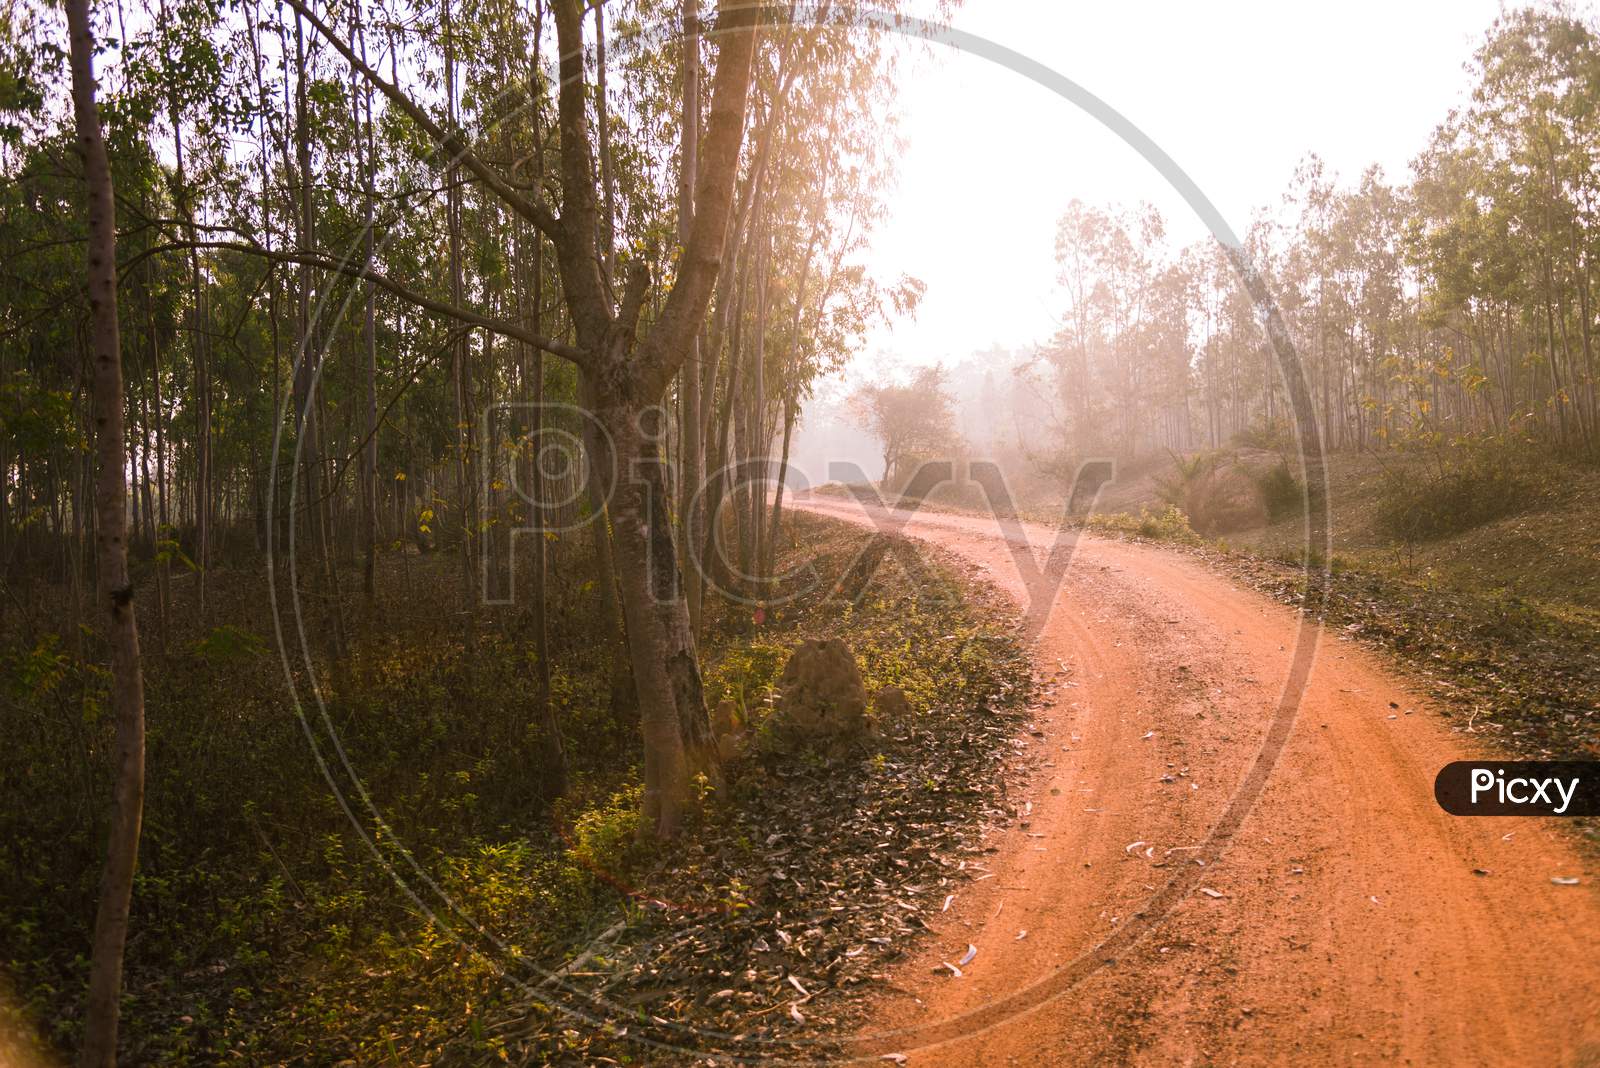 In the morning, there is a red dirt road in the middle of Jhargram forest